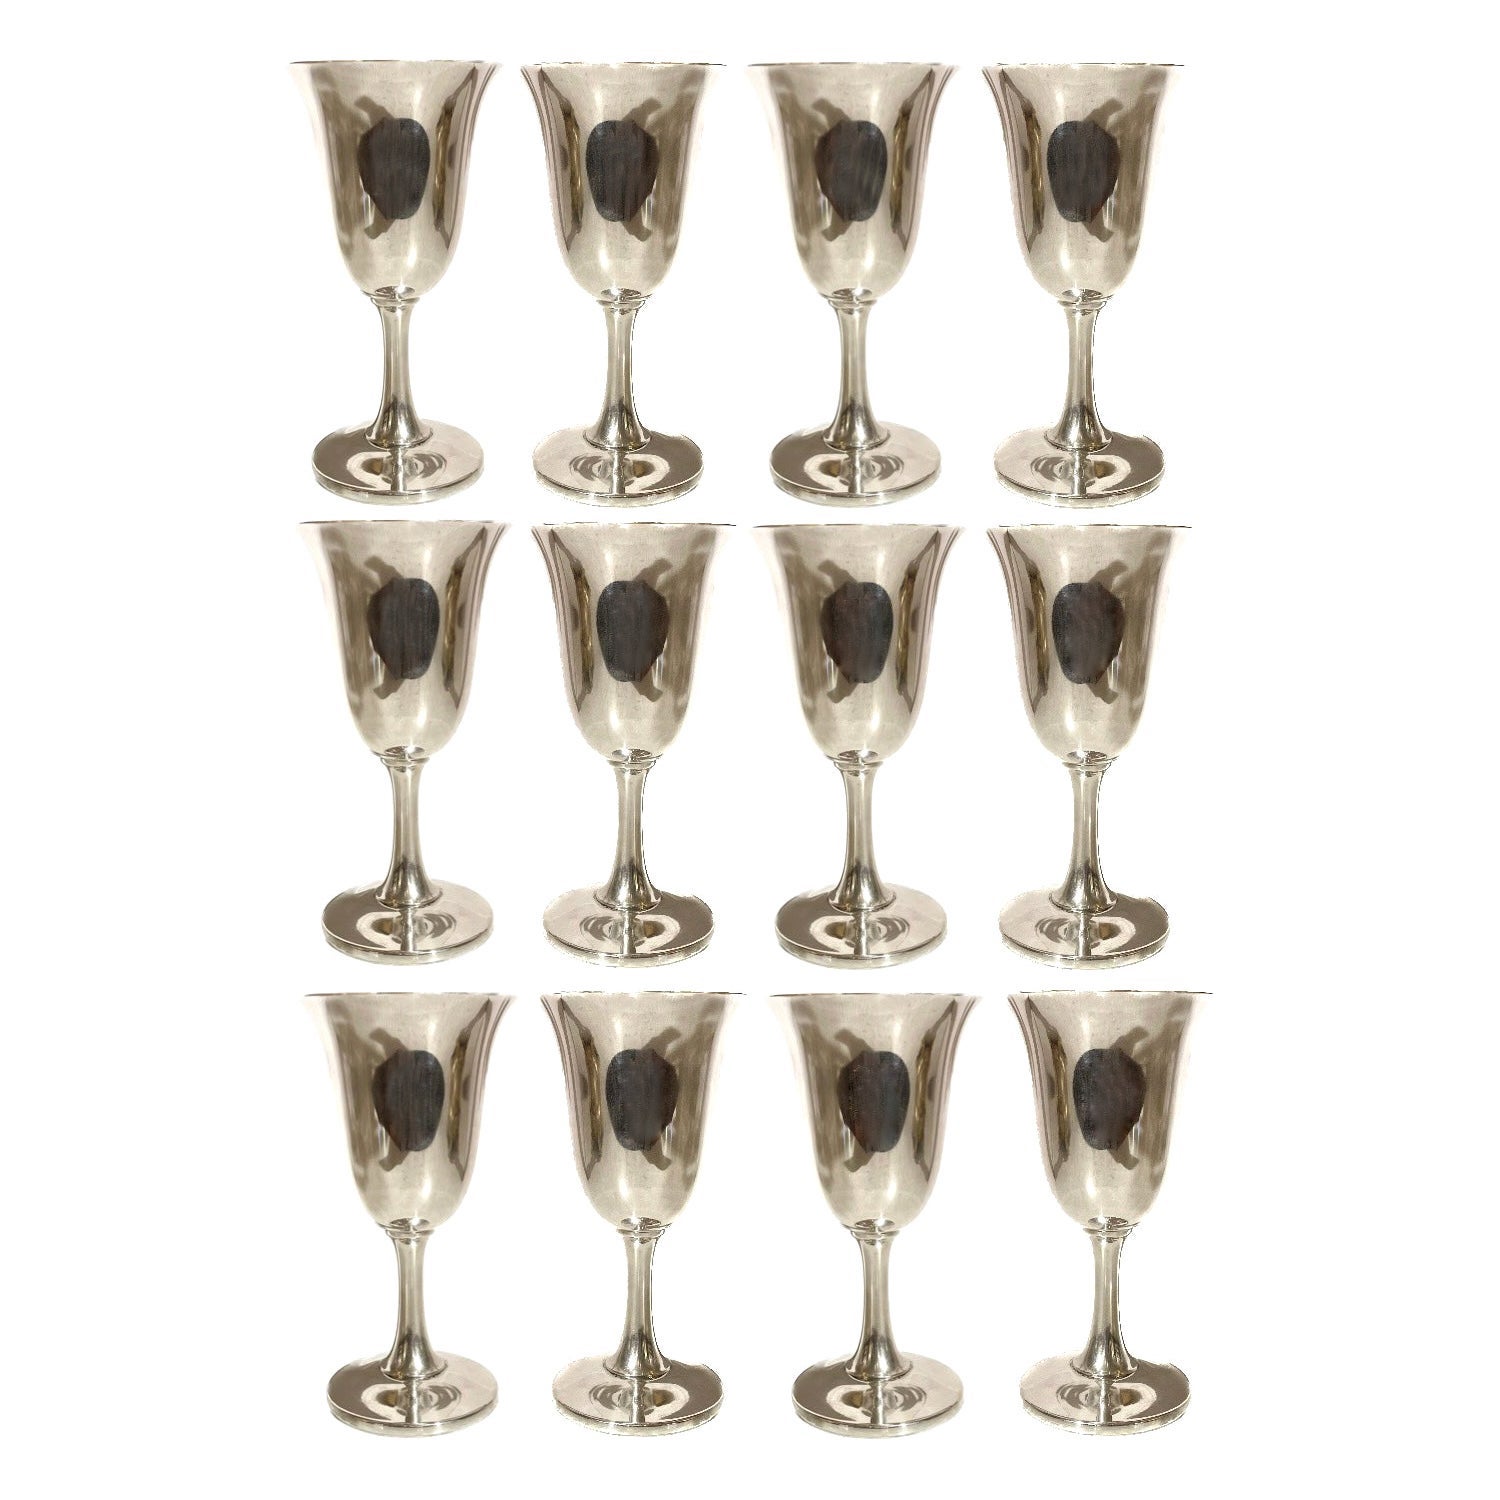 Set of 12 Antique American Sterling Silver Goblets Signed "Wallace" Circa 1900. For Sale